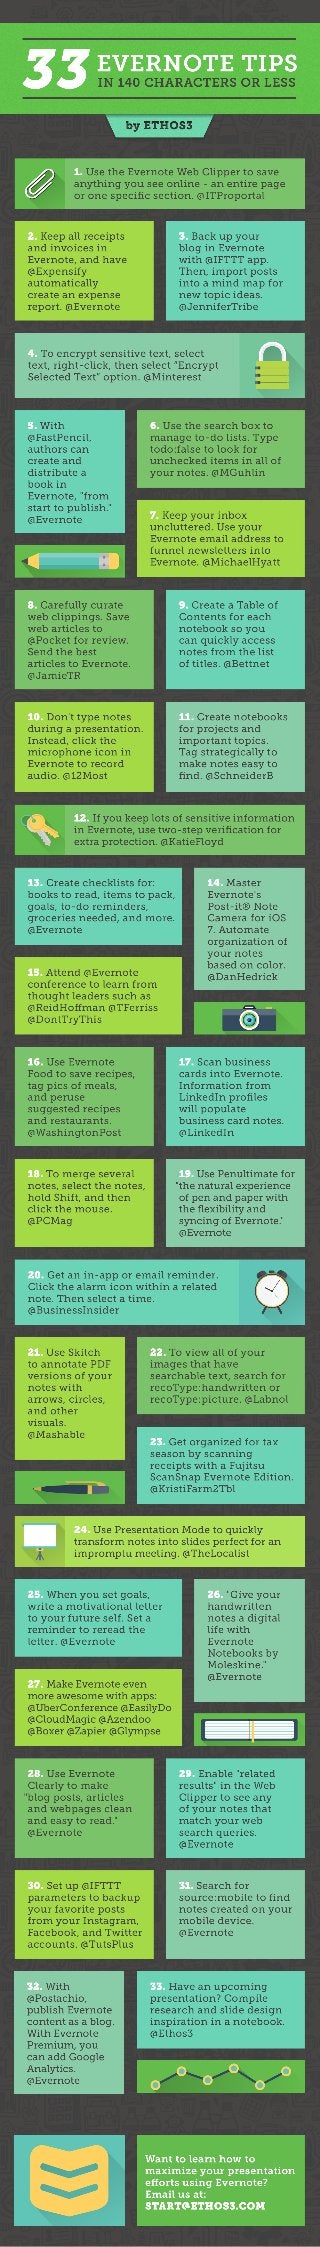 33 Evernote Tips, in 140 characters or less